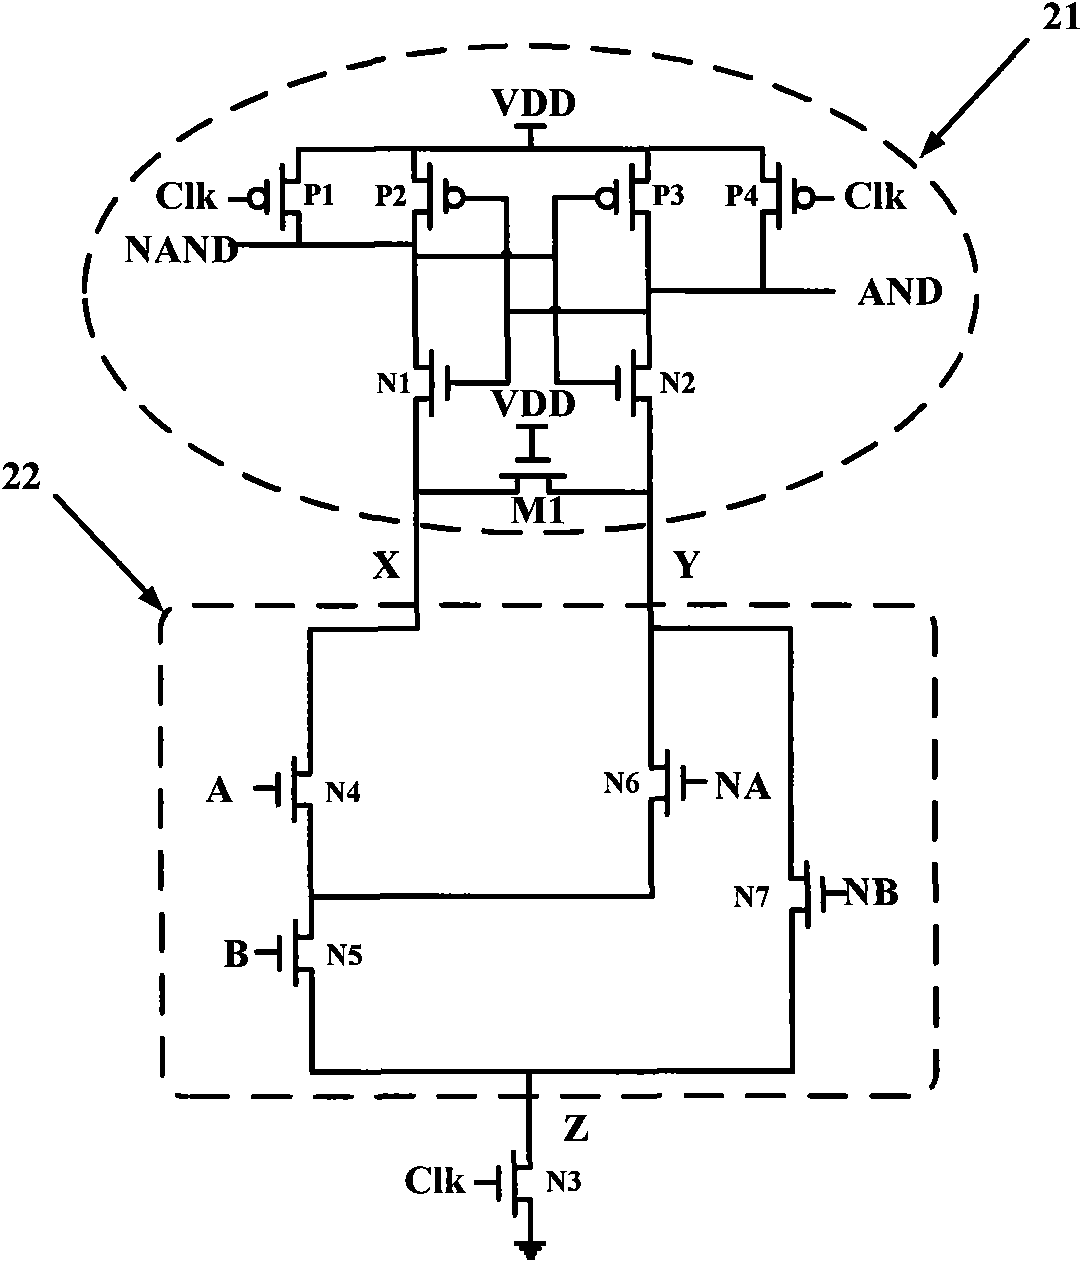 Full-custom AES SubByte circuit resisting differential power analysis attack